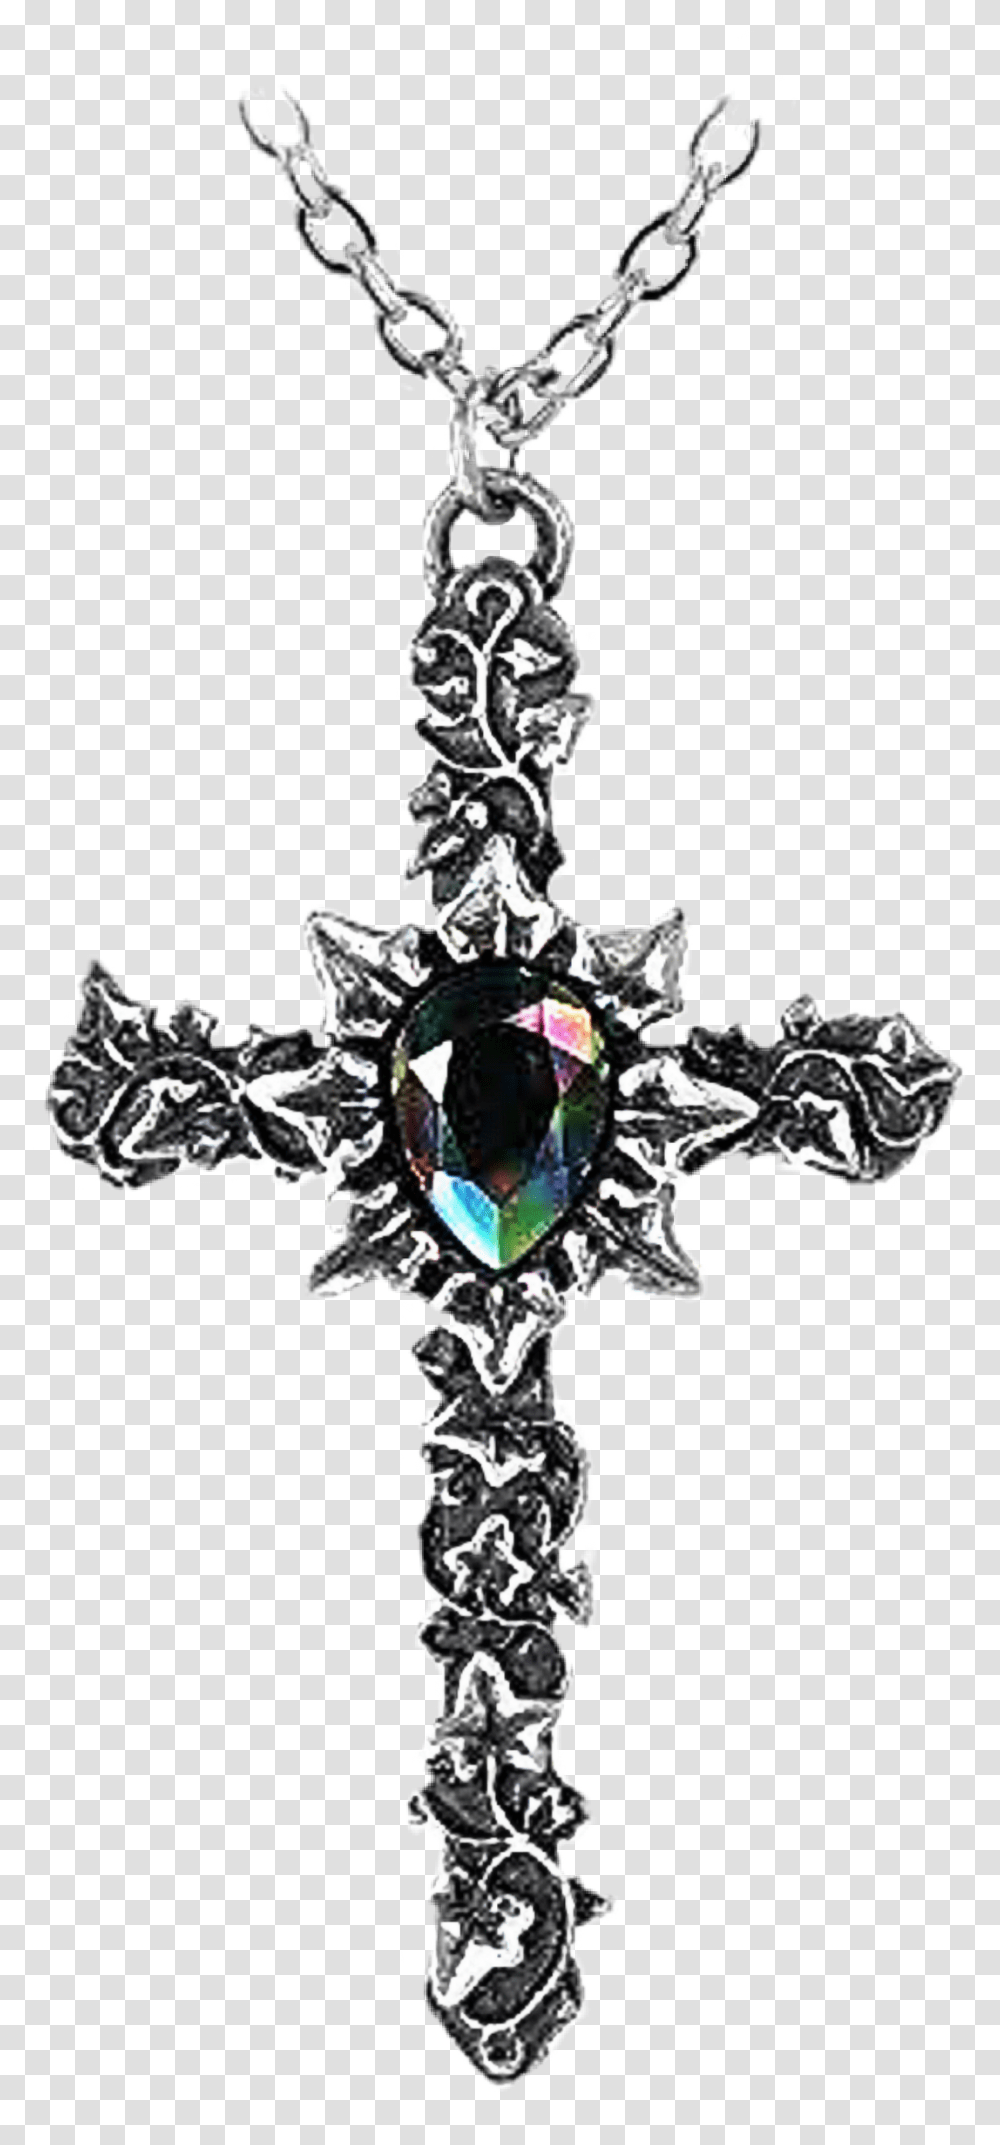 Cross Necklace Crossnecklace Crucifix Rosary Cross Rainbow Gem Necklaace, Accessories, Accessory, Jewelry, Diamond Transparent Png